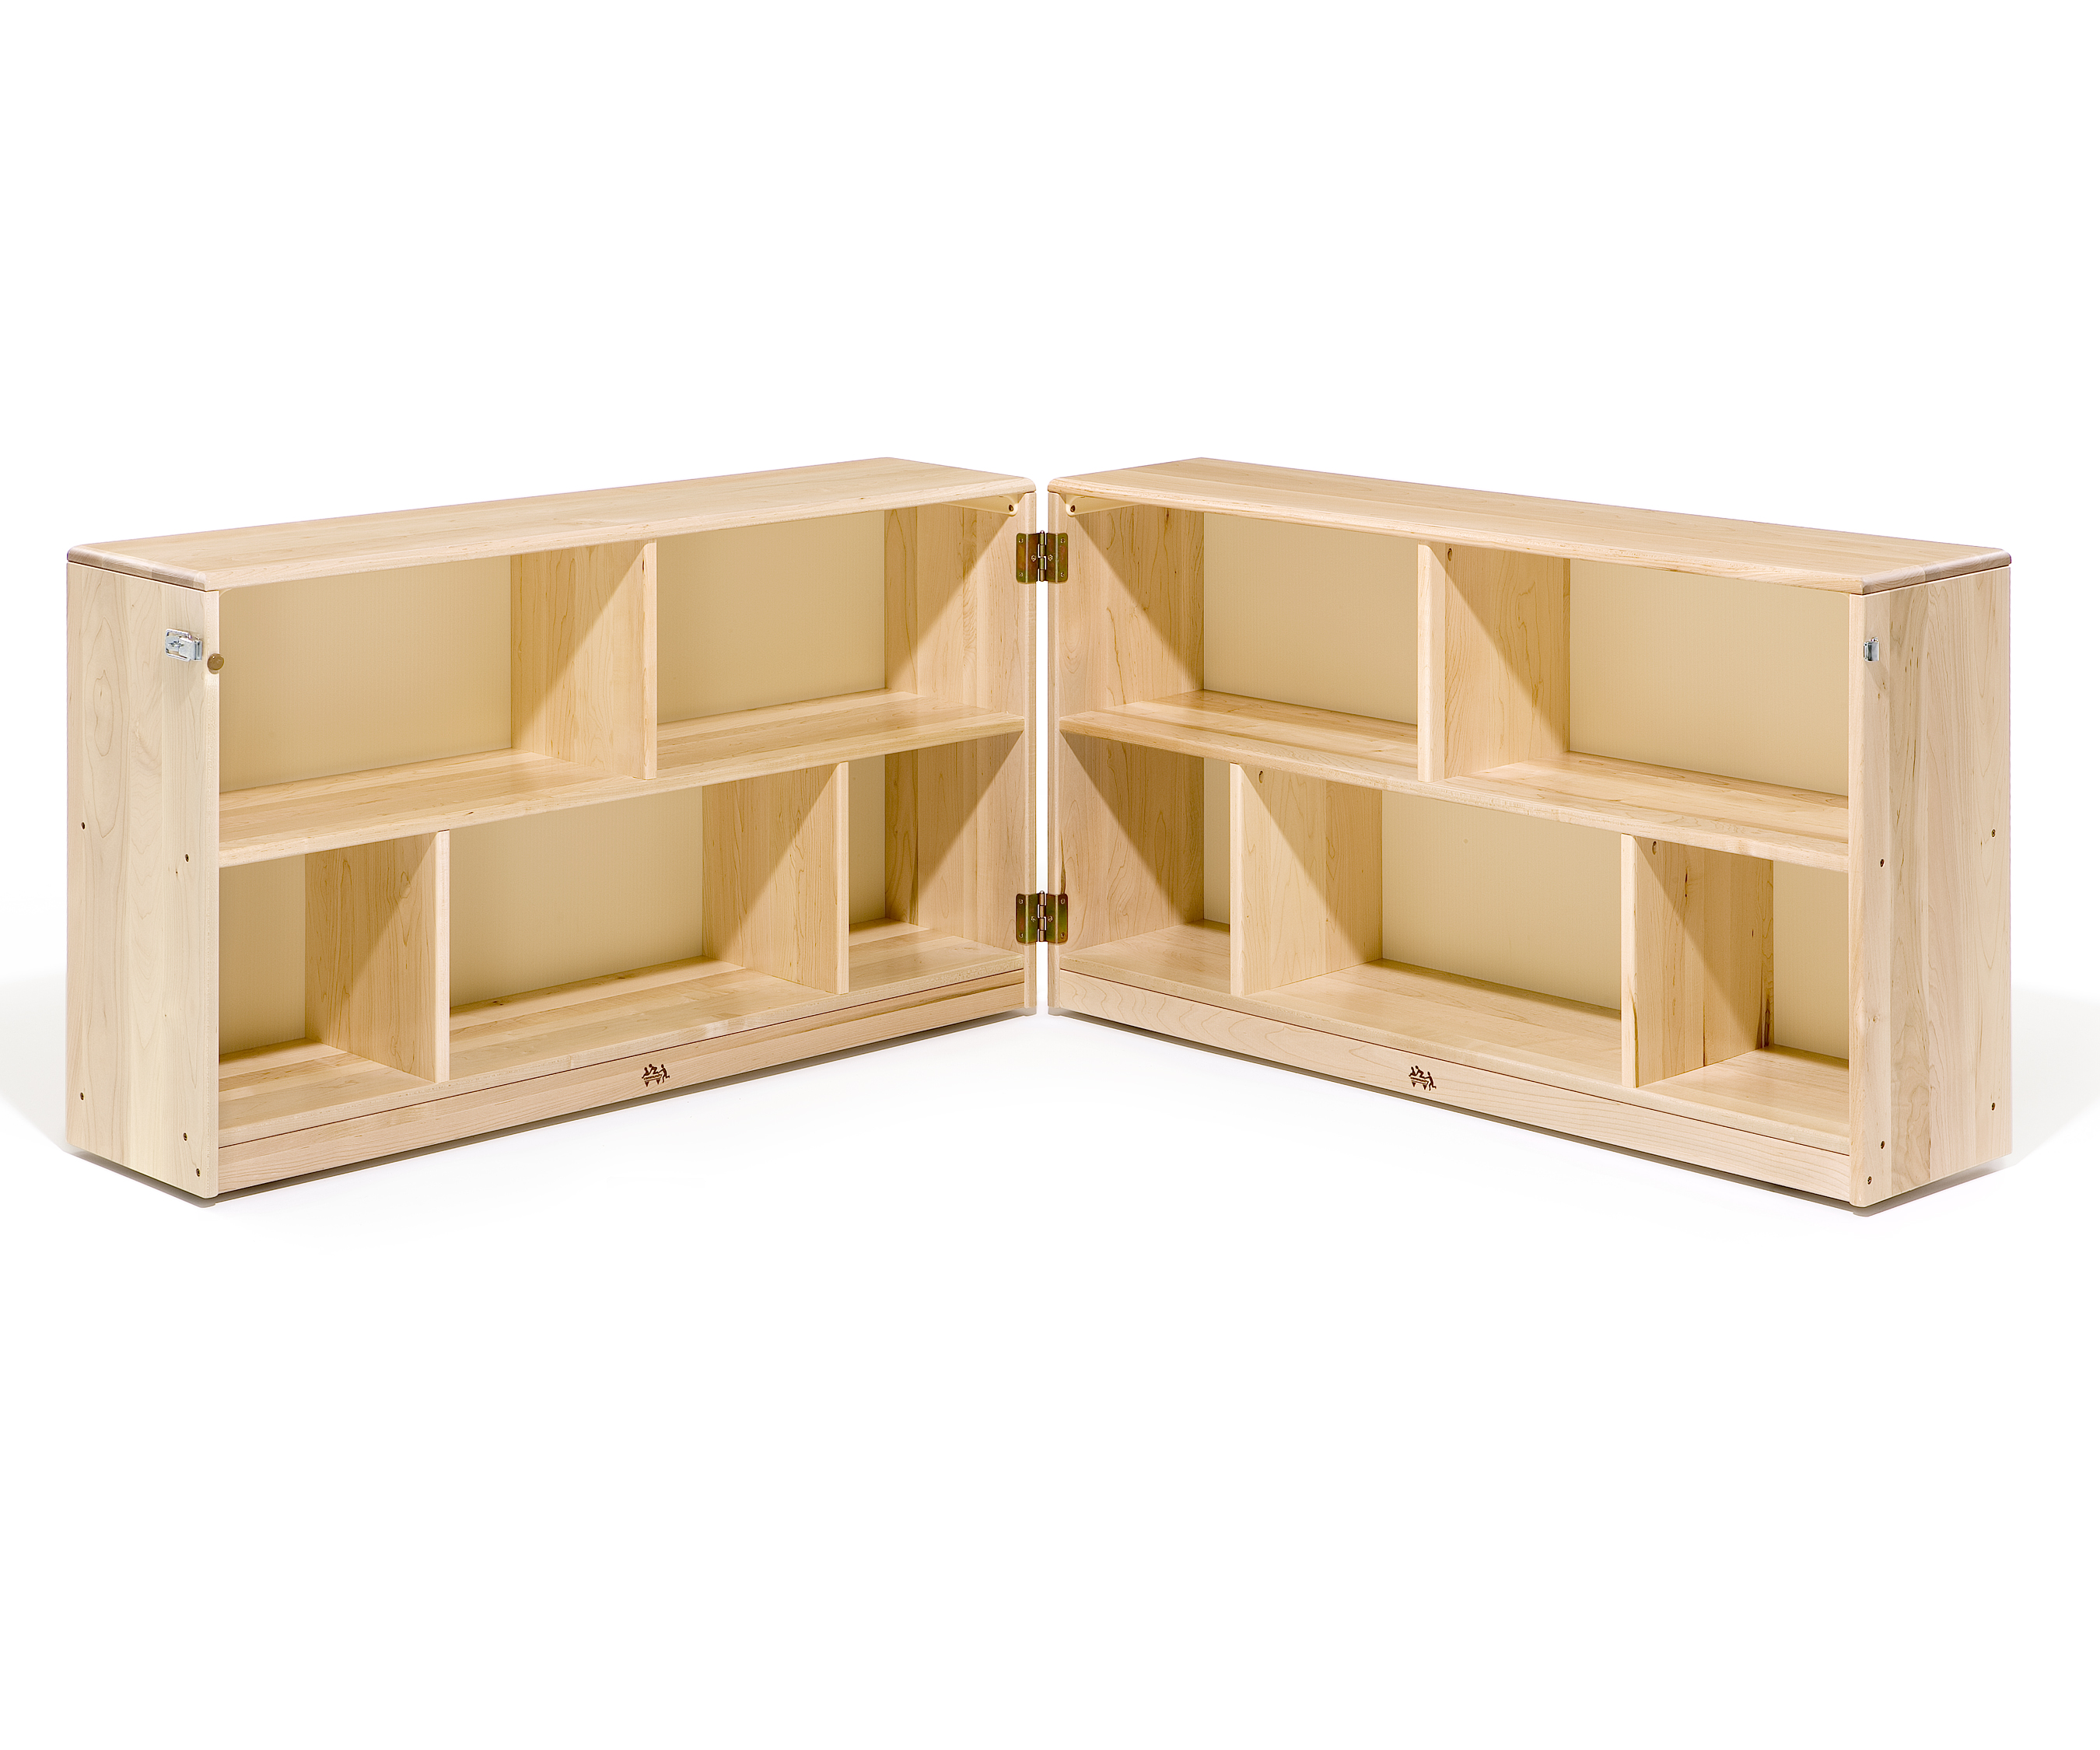 https://www.communityplaythings.com/-/media/images/product-images/classroom/cabinets-and-storage/product-images/f242-locking-low-storage-unit/f242-primary.ashx?rev=1d4d43c1f628483097e71090f01fd950&hash=0176C07BD7F5B78CB5645497B9CDC8A9